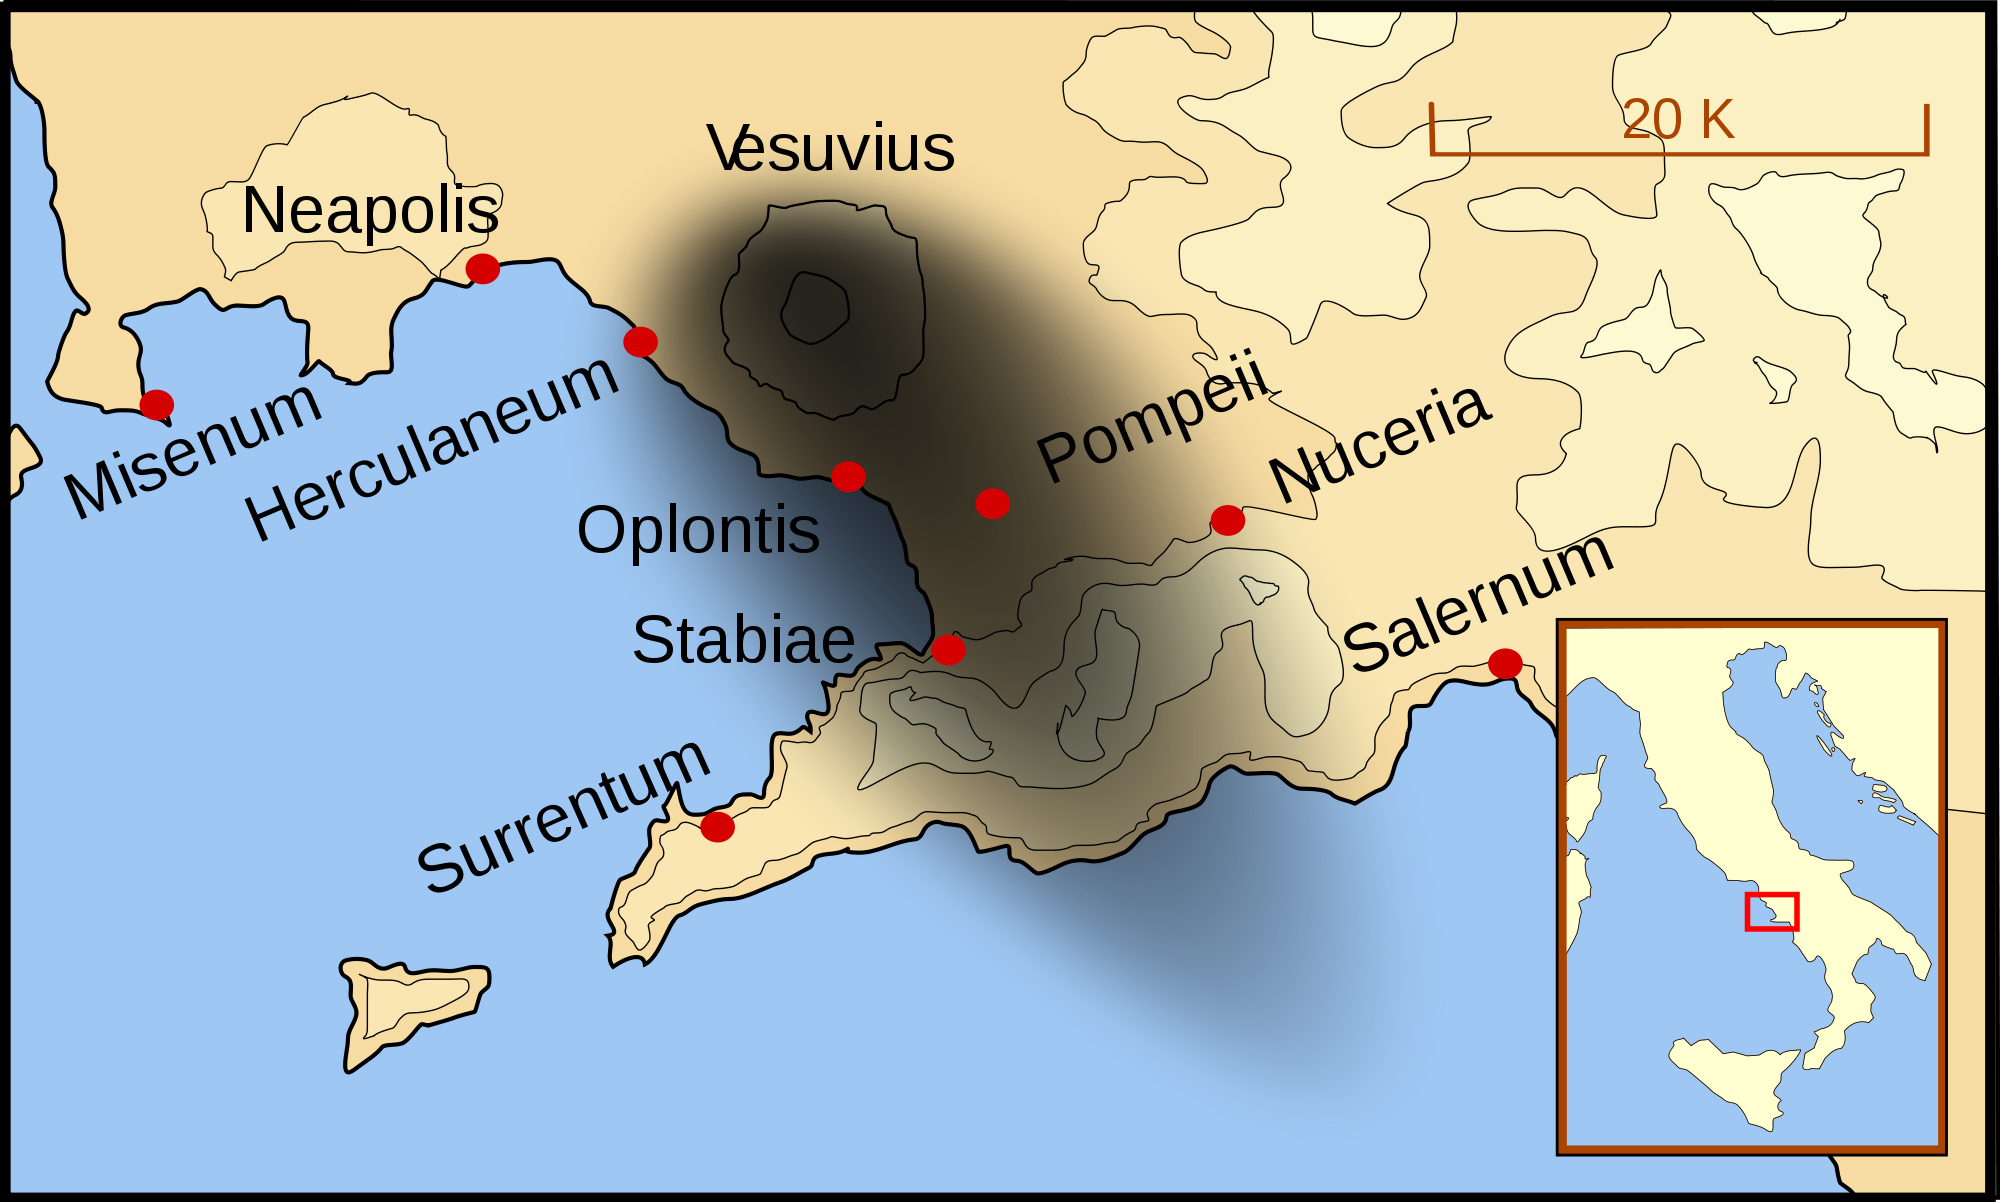 Bay of Naples 79AD -- Plan of Vesuvius ash distibution from the 79 AD eruption showing the cities and towns which were affected. Photo by MapMaster, Wikimedia.